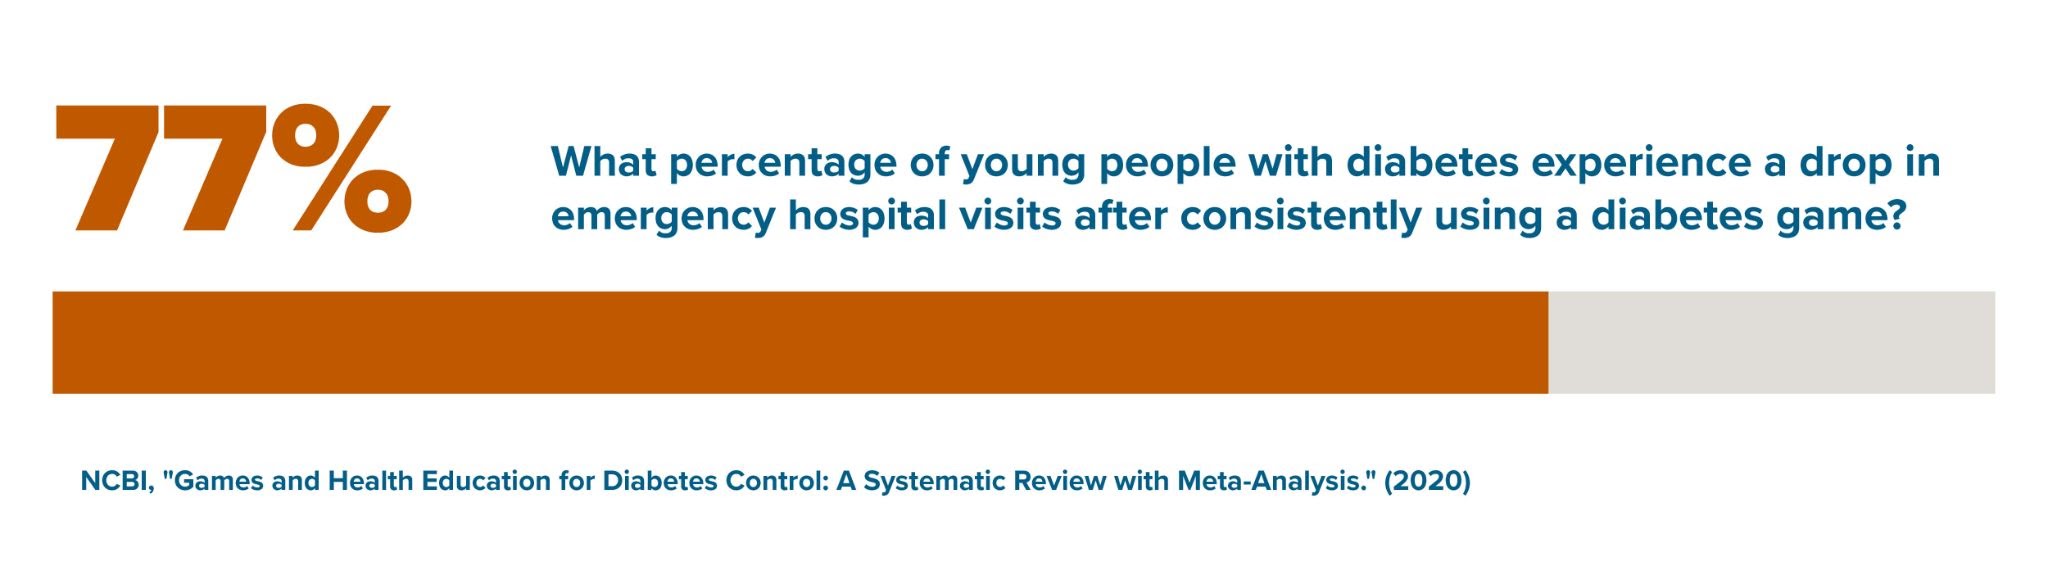 Statistic of percentage of young people with disabilities that have experienced a drop in emergency hospital visits after consistently using a diabetes game